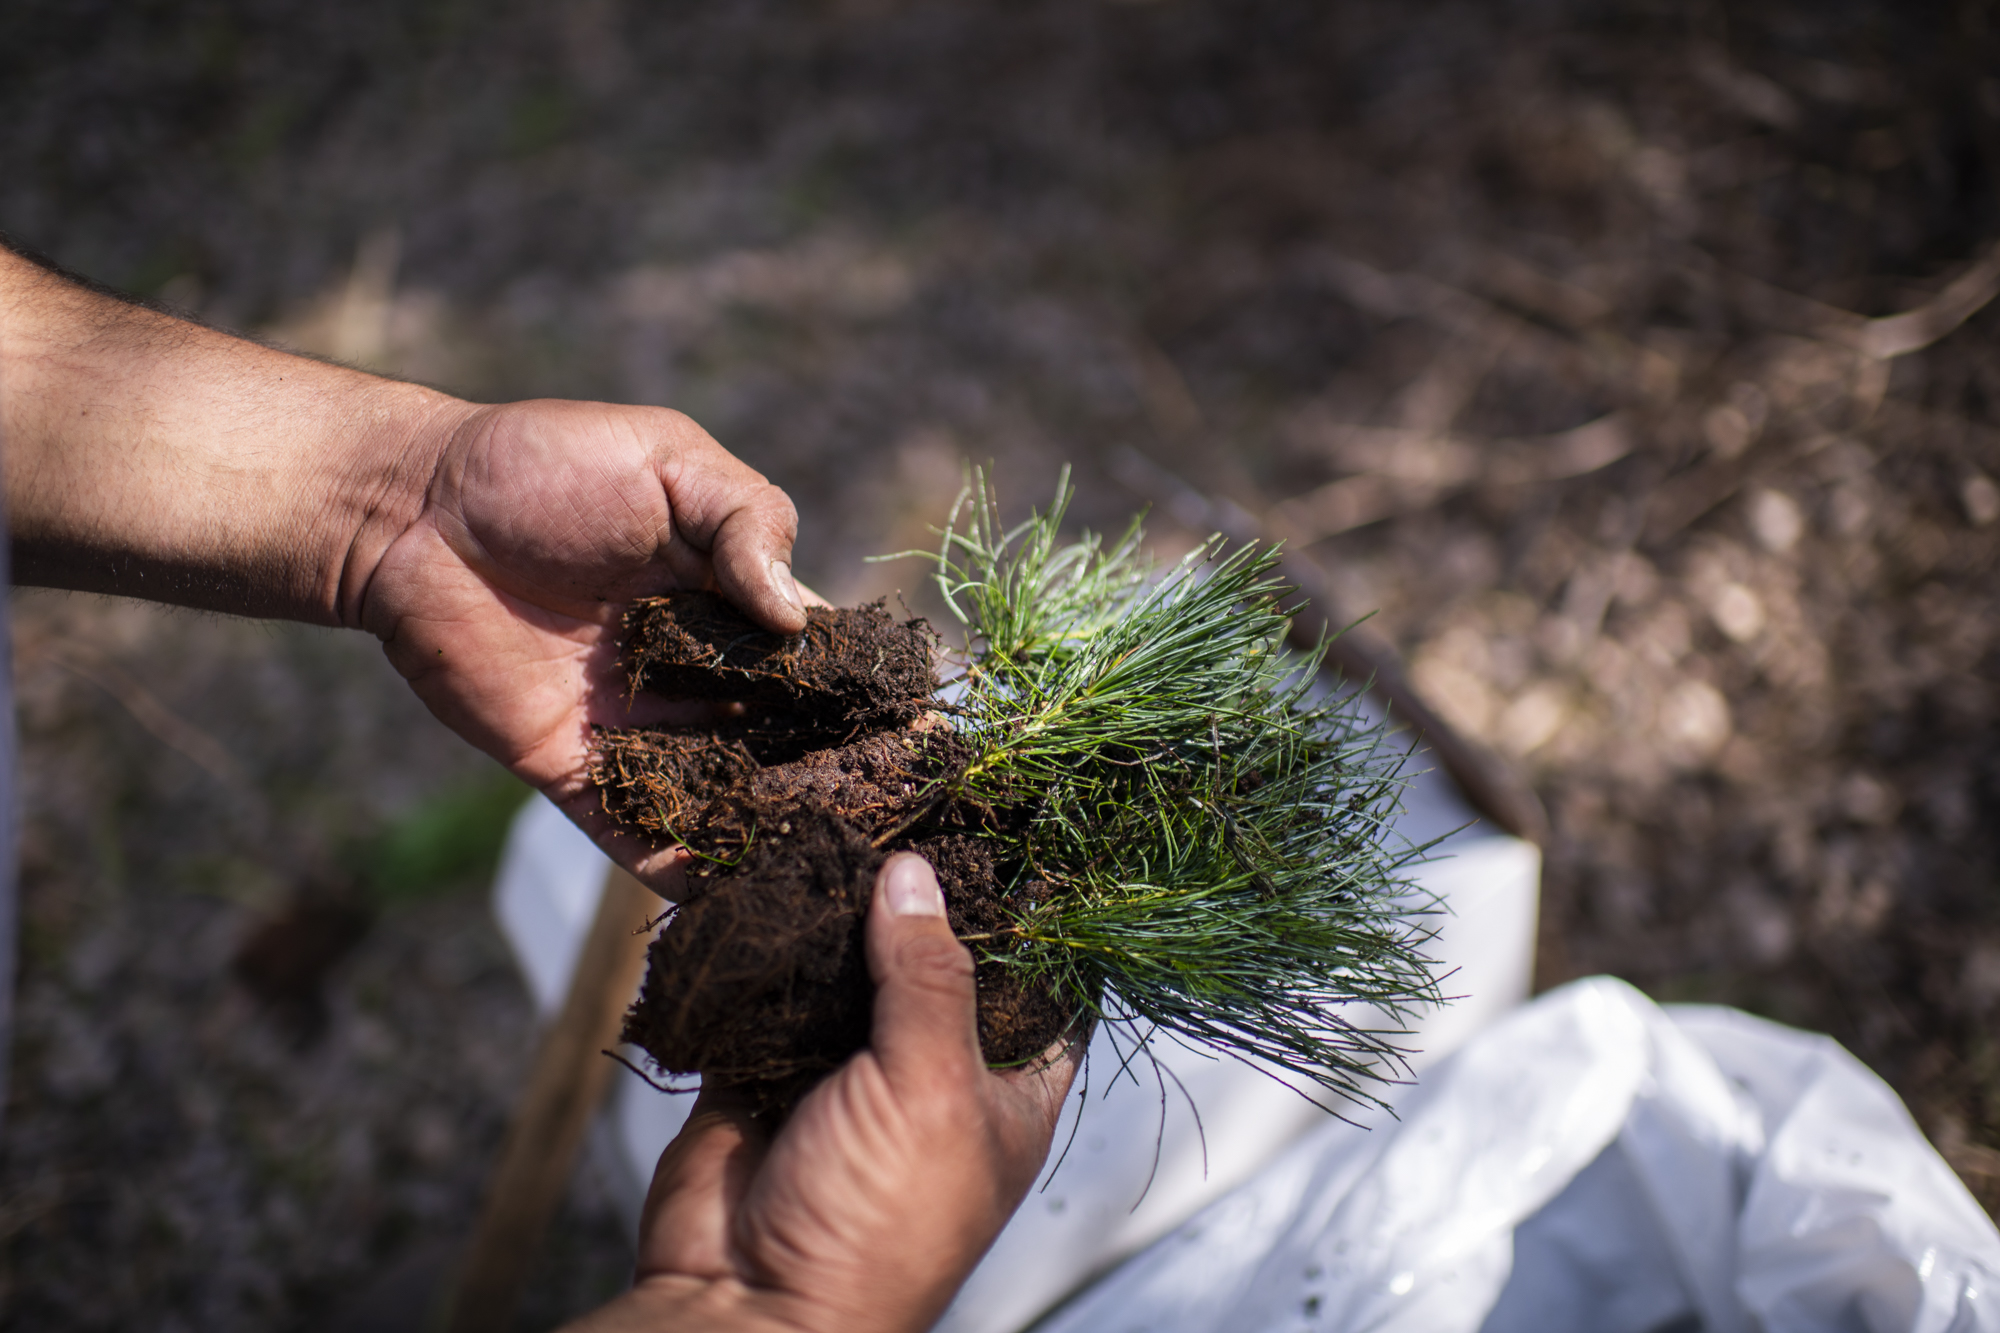 A hand holding a conifer seedling.